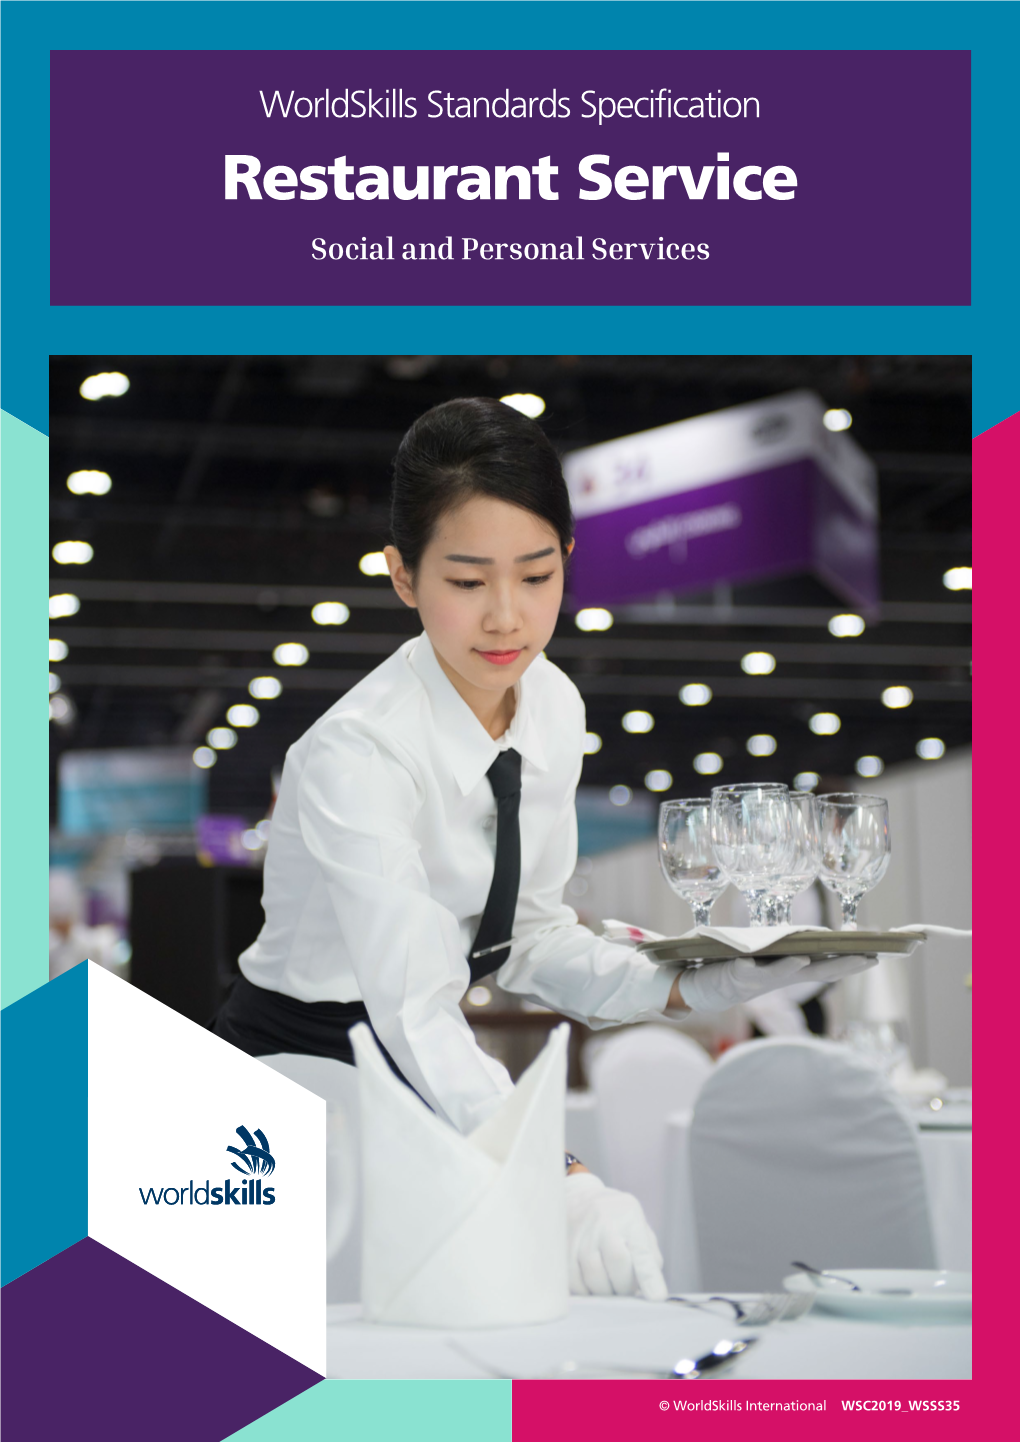 Worldskills Standards Specification Restaurant Service Social and Personal Services